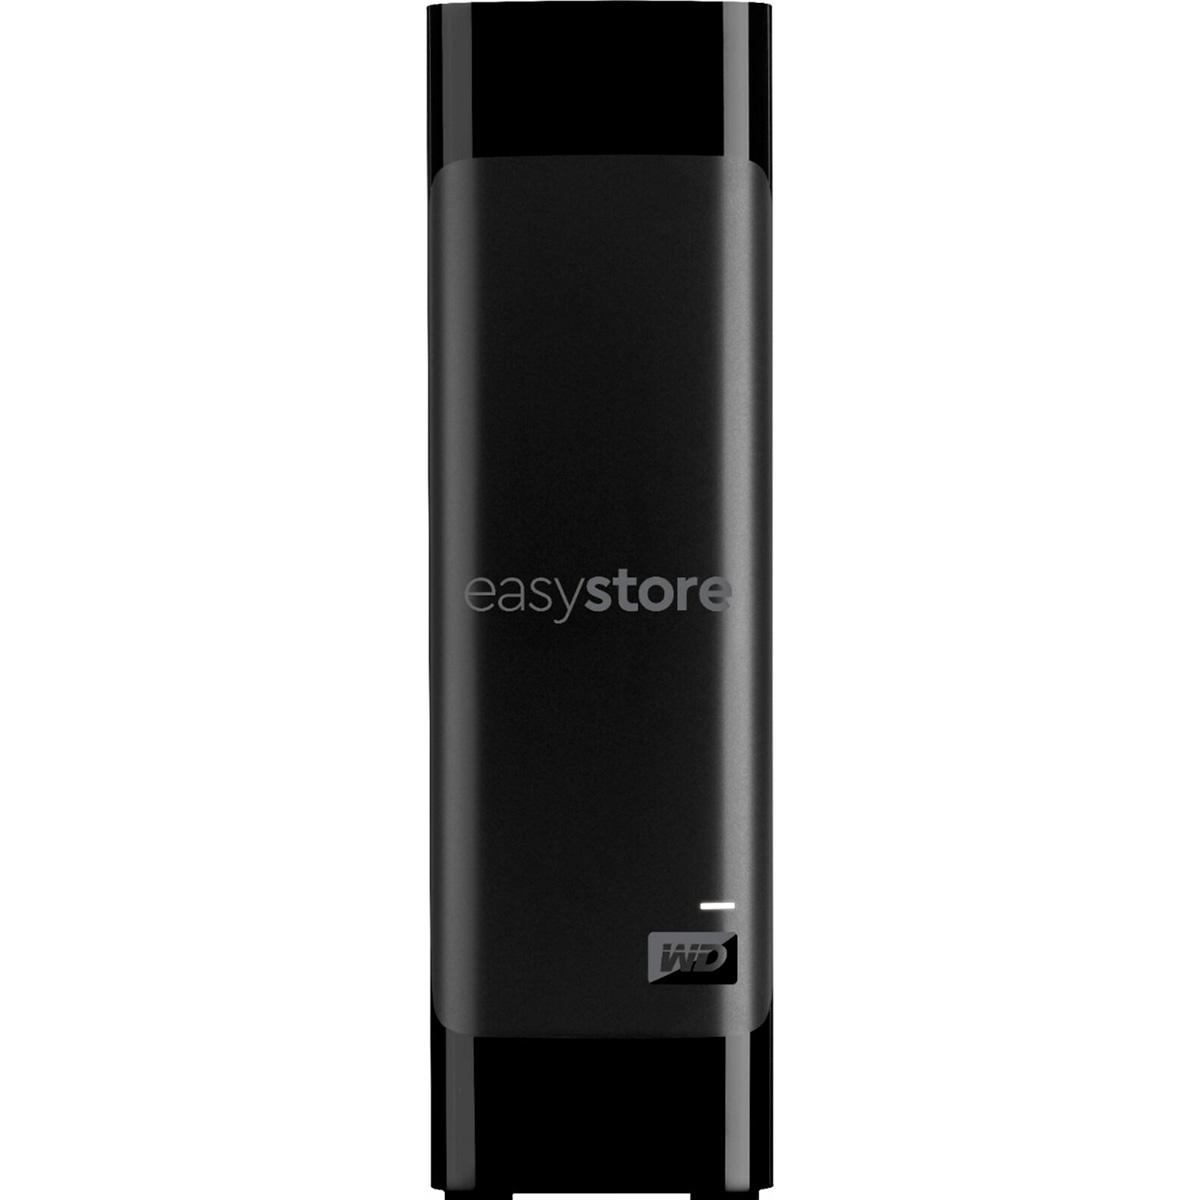 8TB WD Easystore External USB 3.0 Hard Drive for $129.99 Shipped